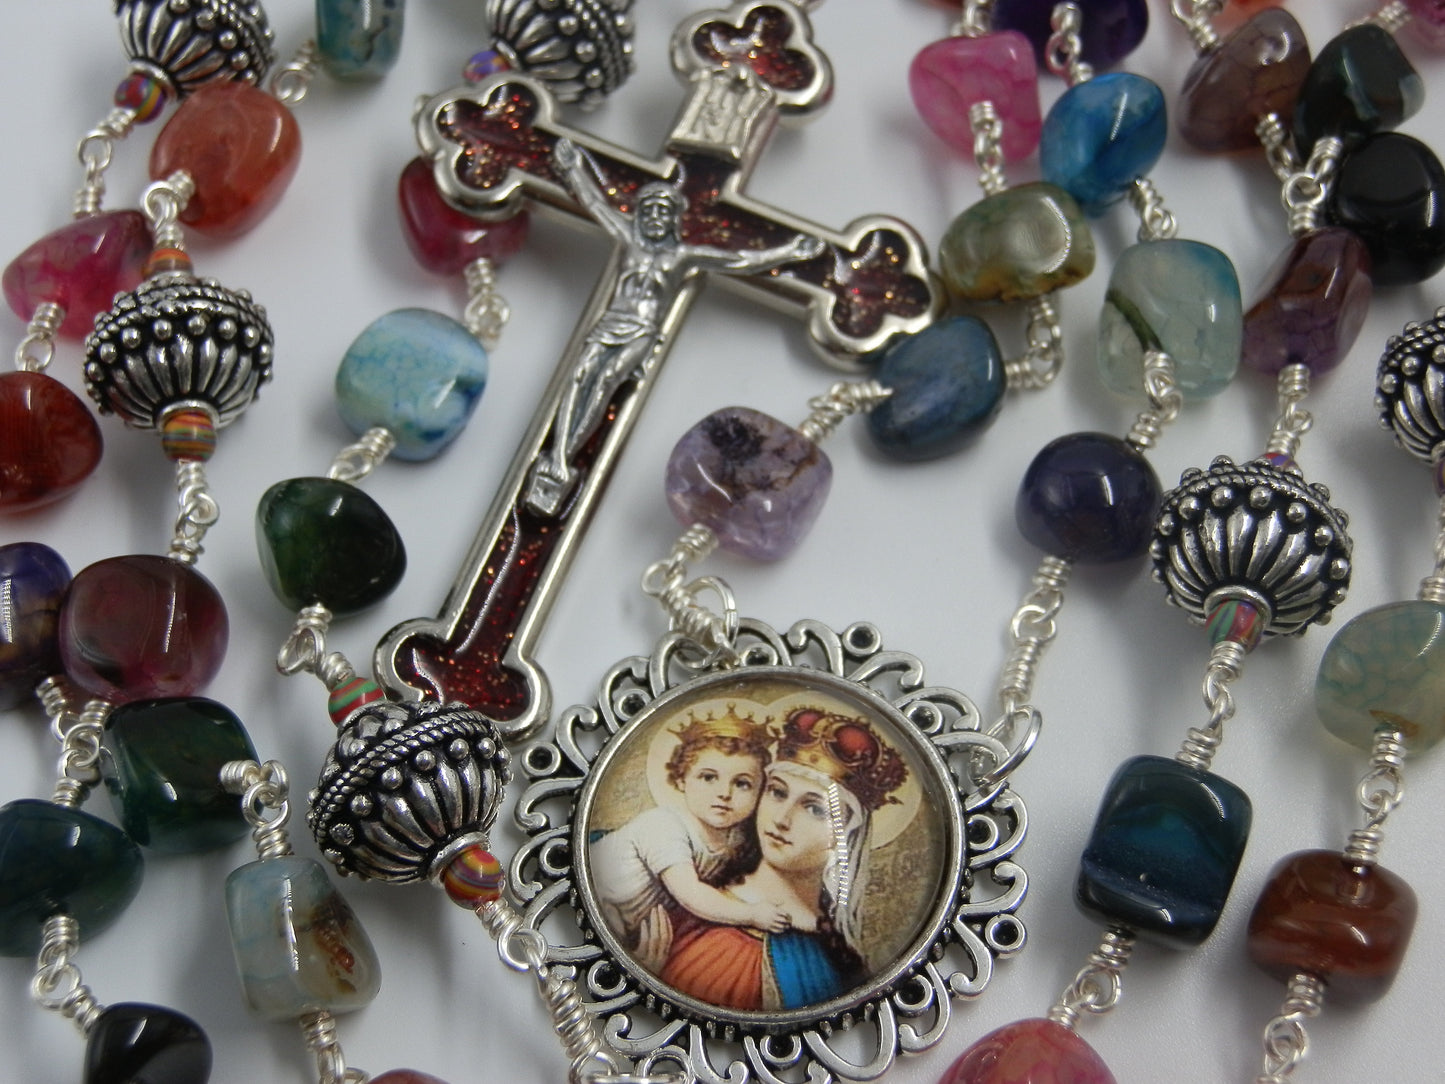 Our Lady Queen of Heaven heirloom gemstone unbreakable rosary beads handmade wire wrapped unique beads.